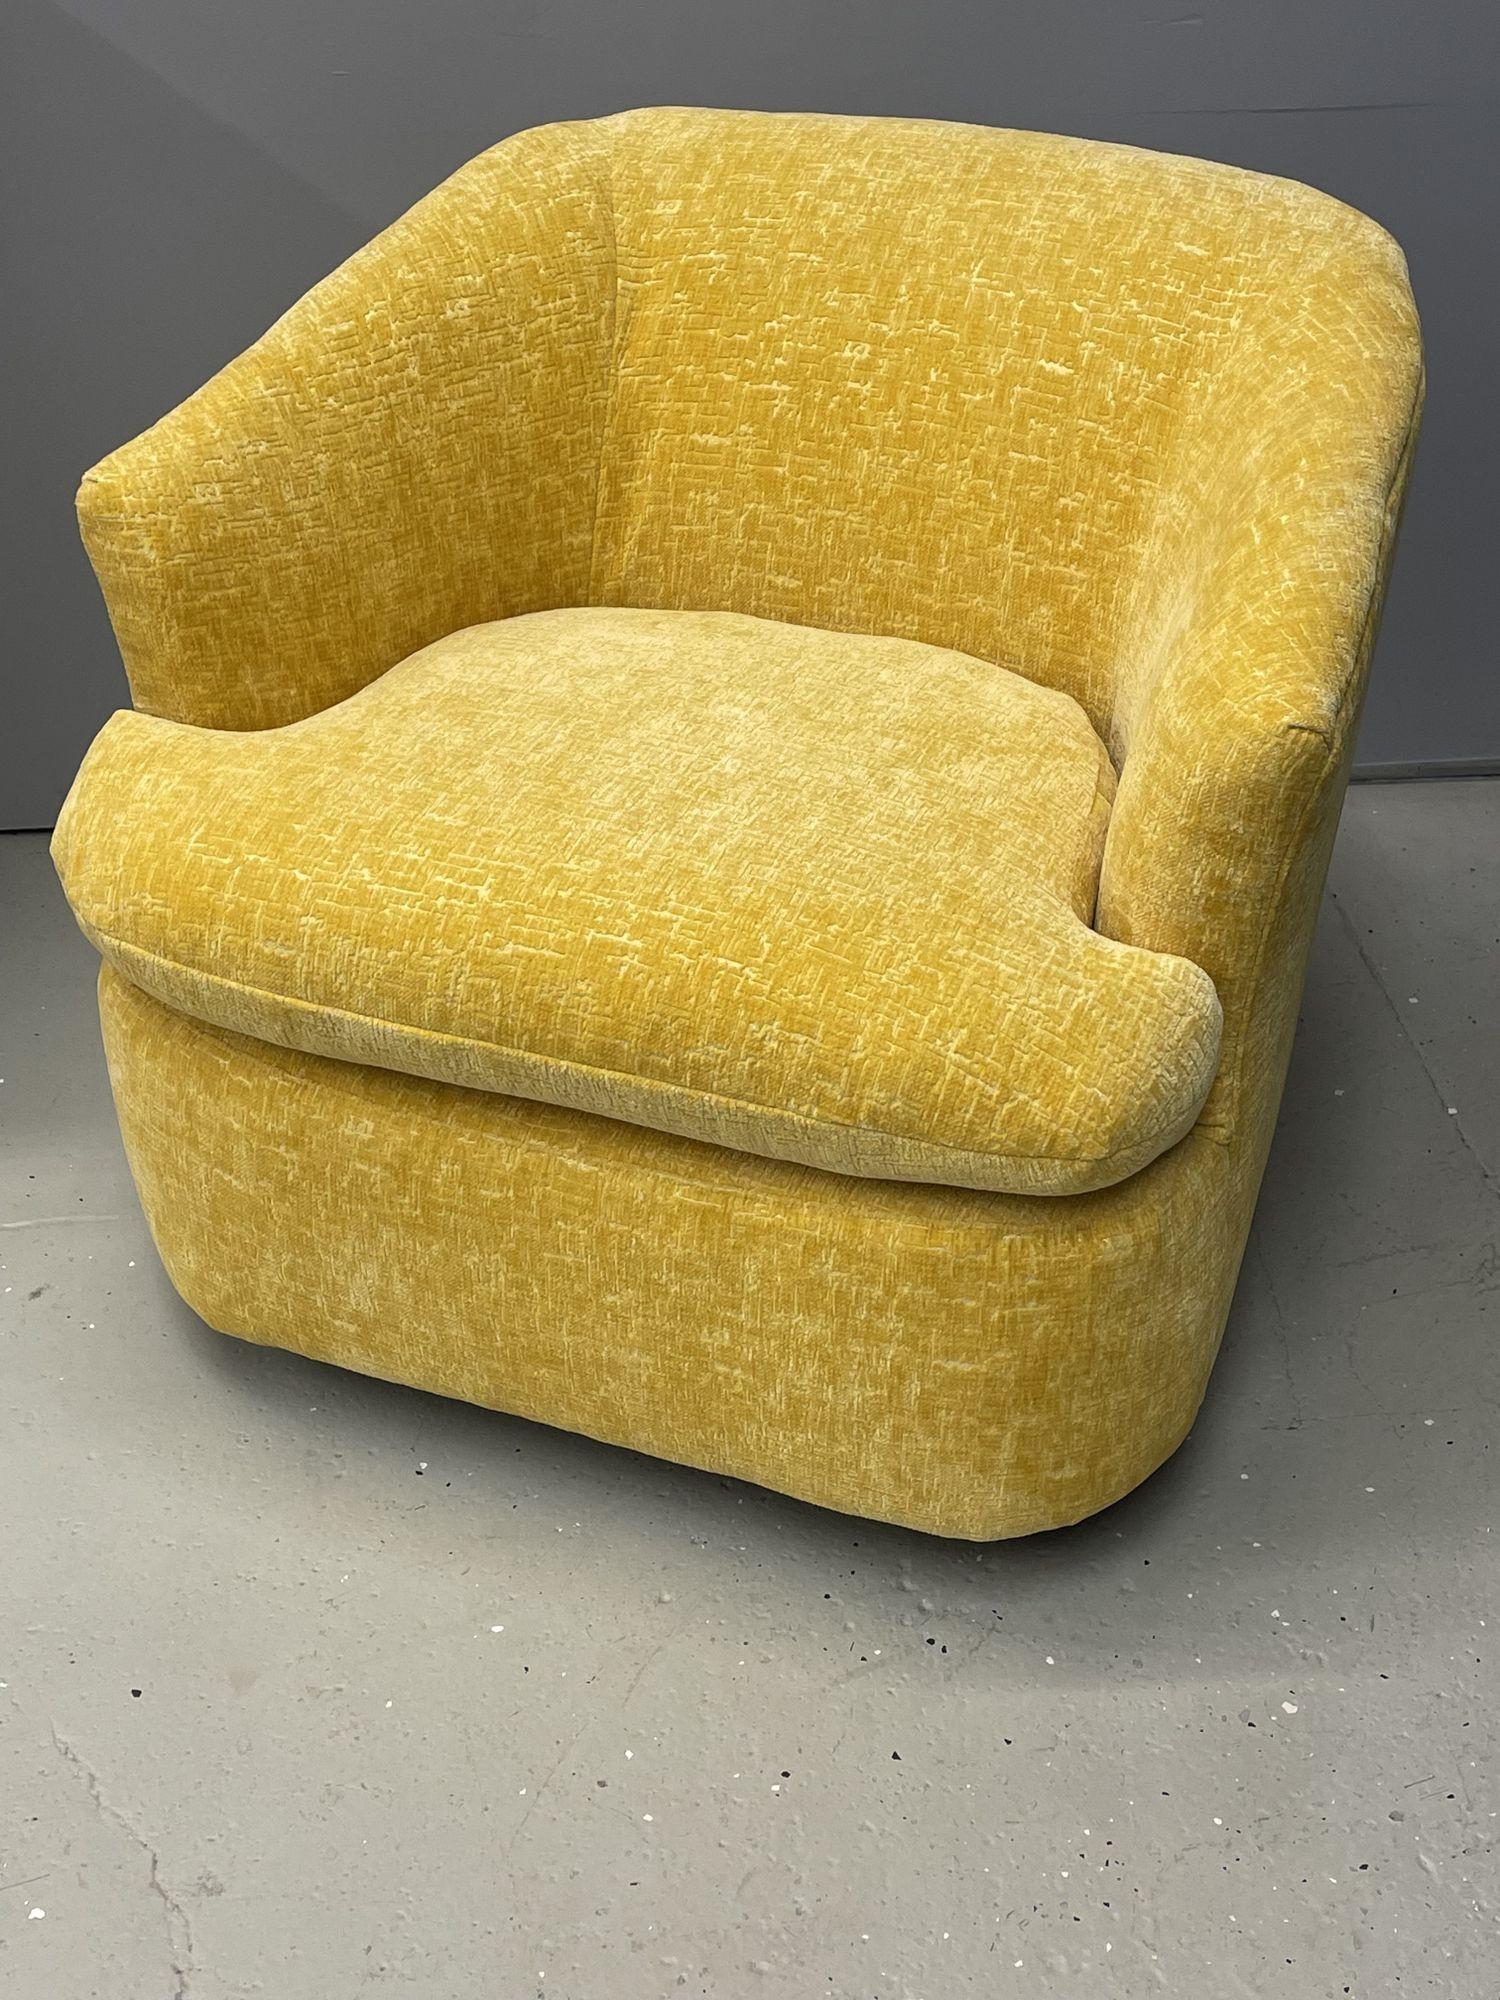 20th Century Pair of Milo Baughman Style Swivel / Tub Chairs, New Yellow Textured Upholstery